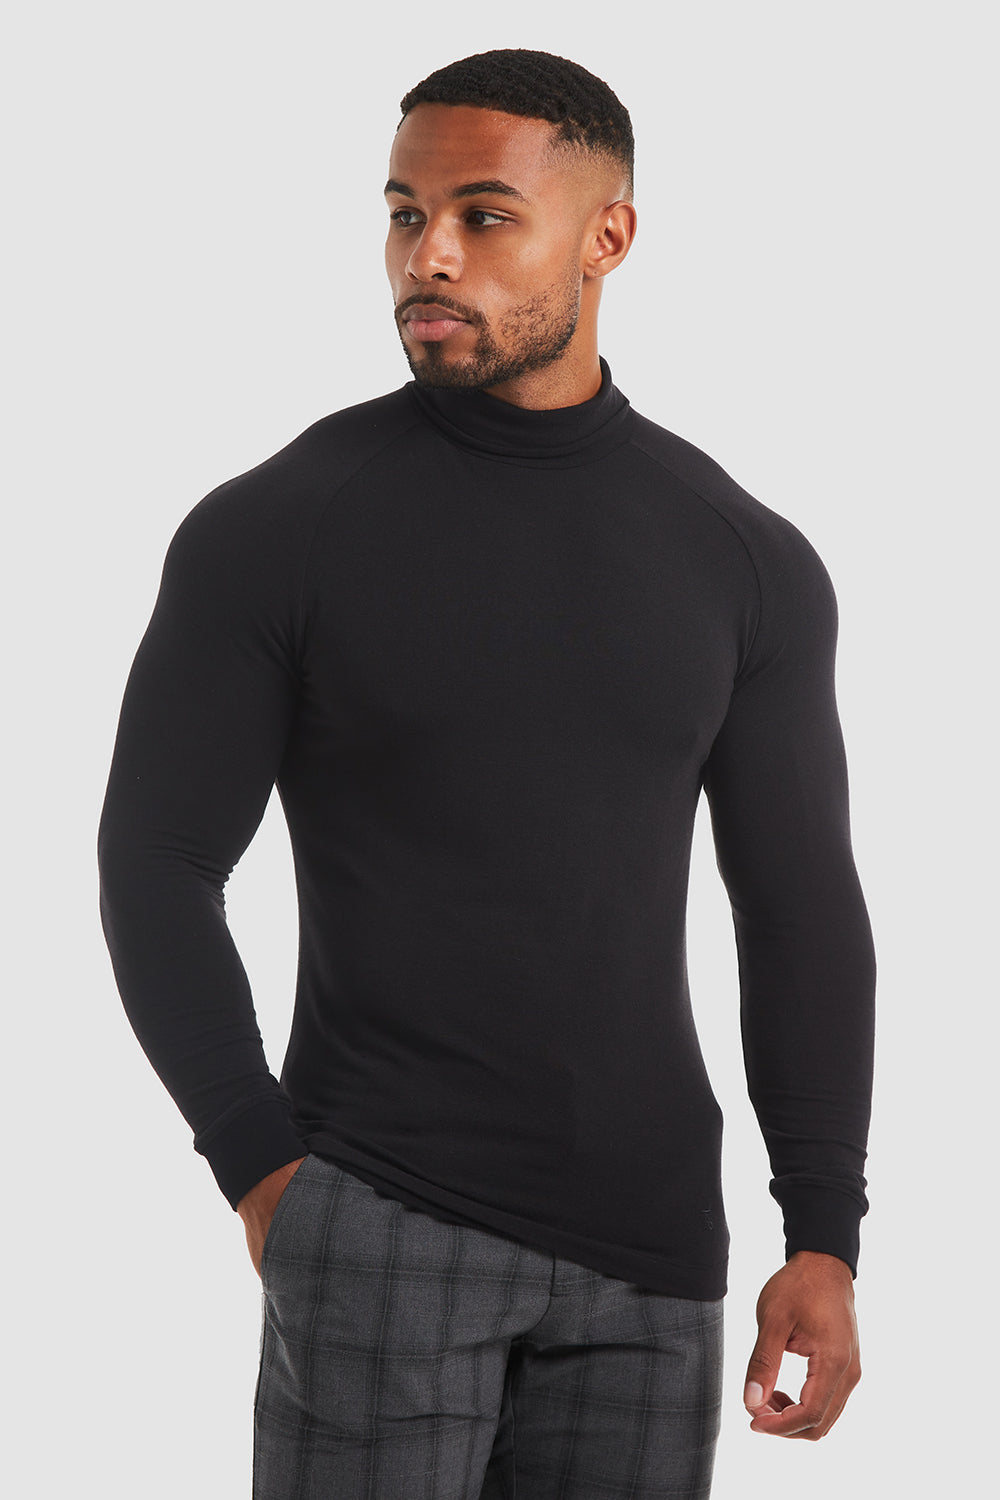 TAILORED Roll Look - USA Jersey Neck in ATHLETE Black (LS) - Knit